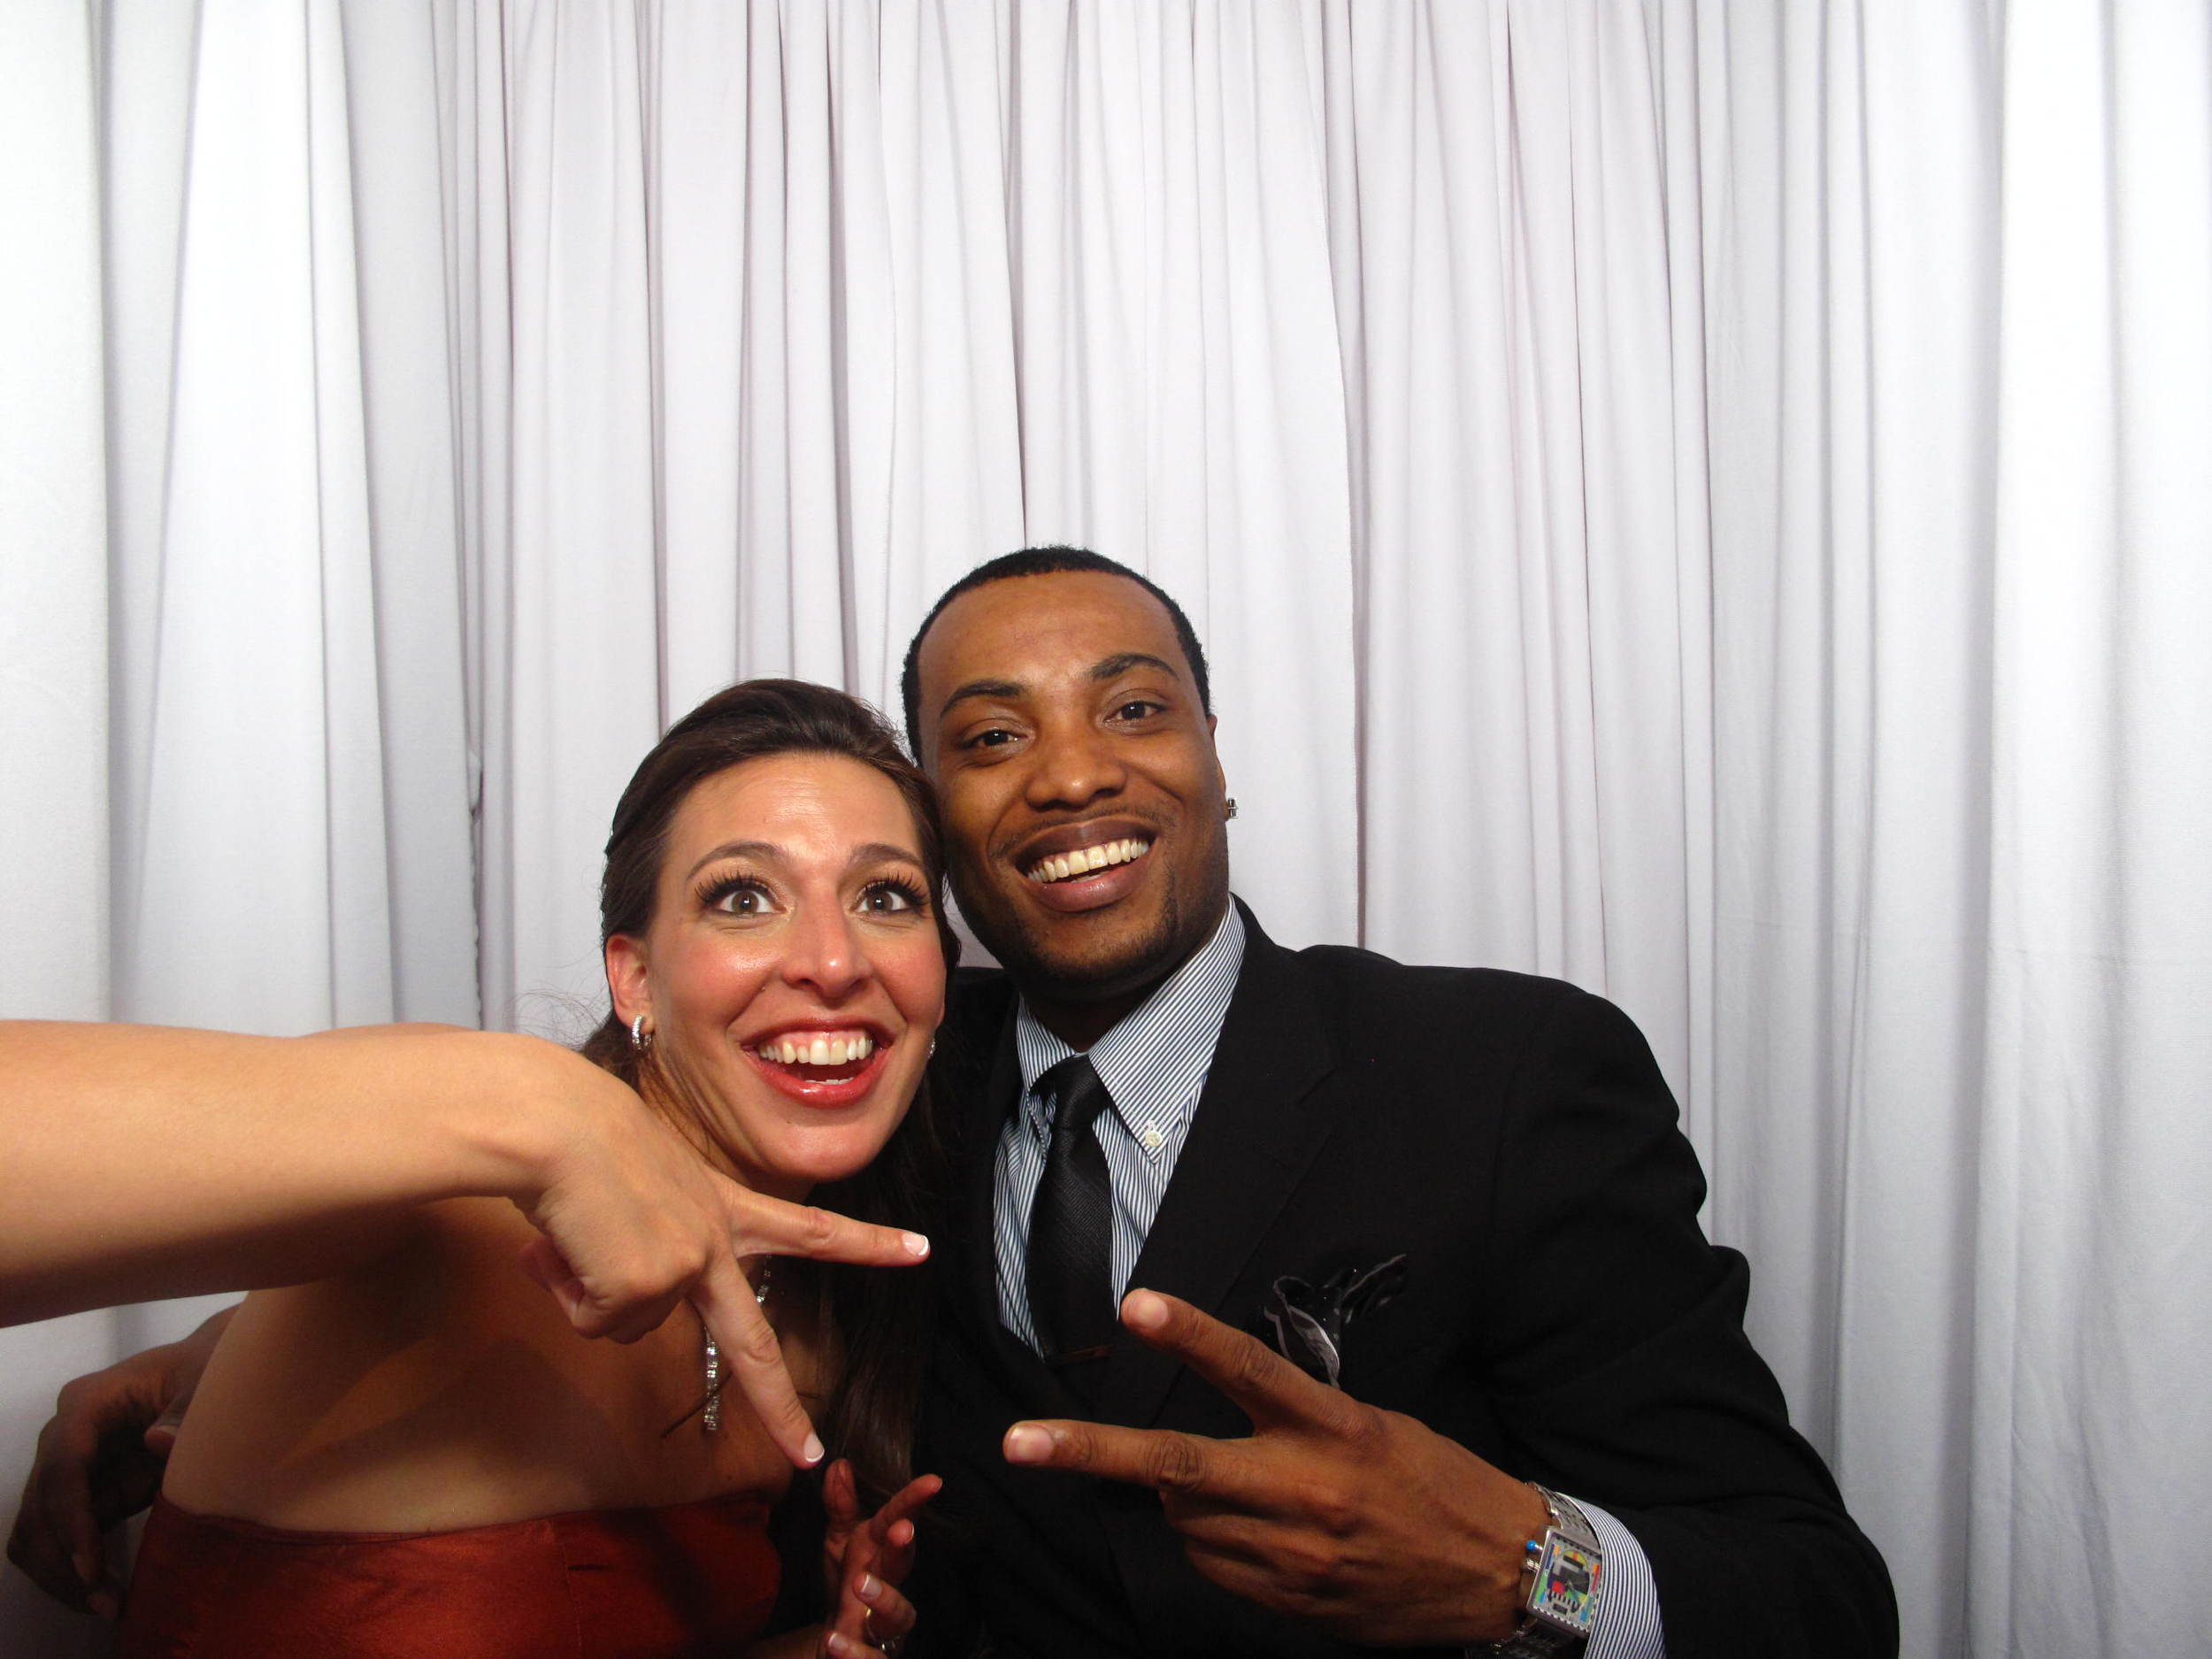 Snapshot Photobooths at Valley Regency in Clifton, New Jersey